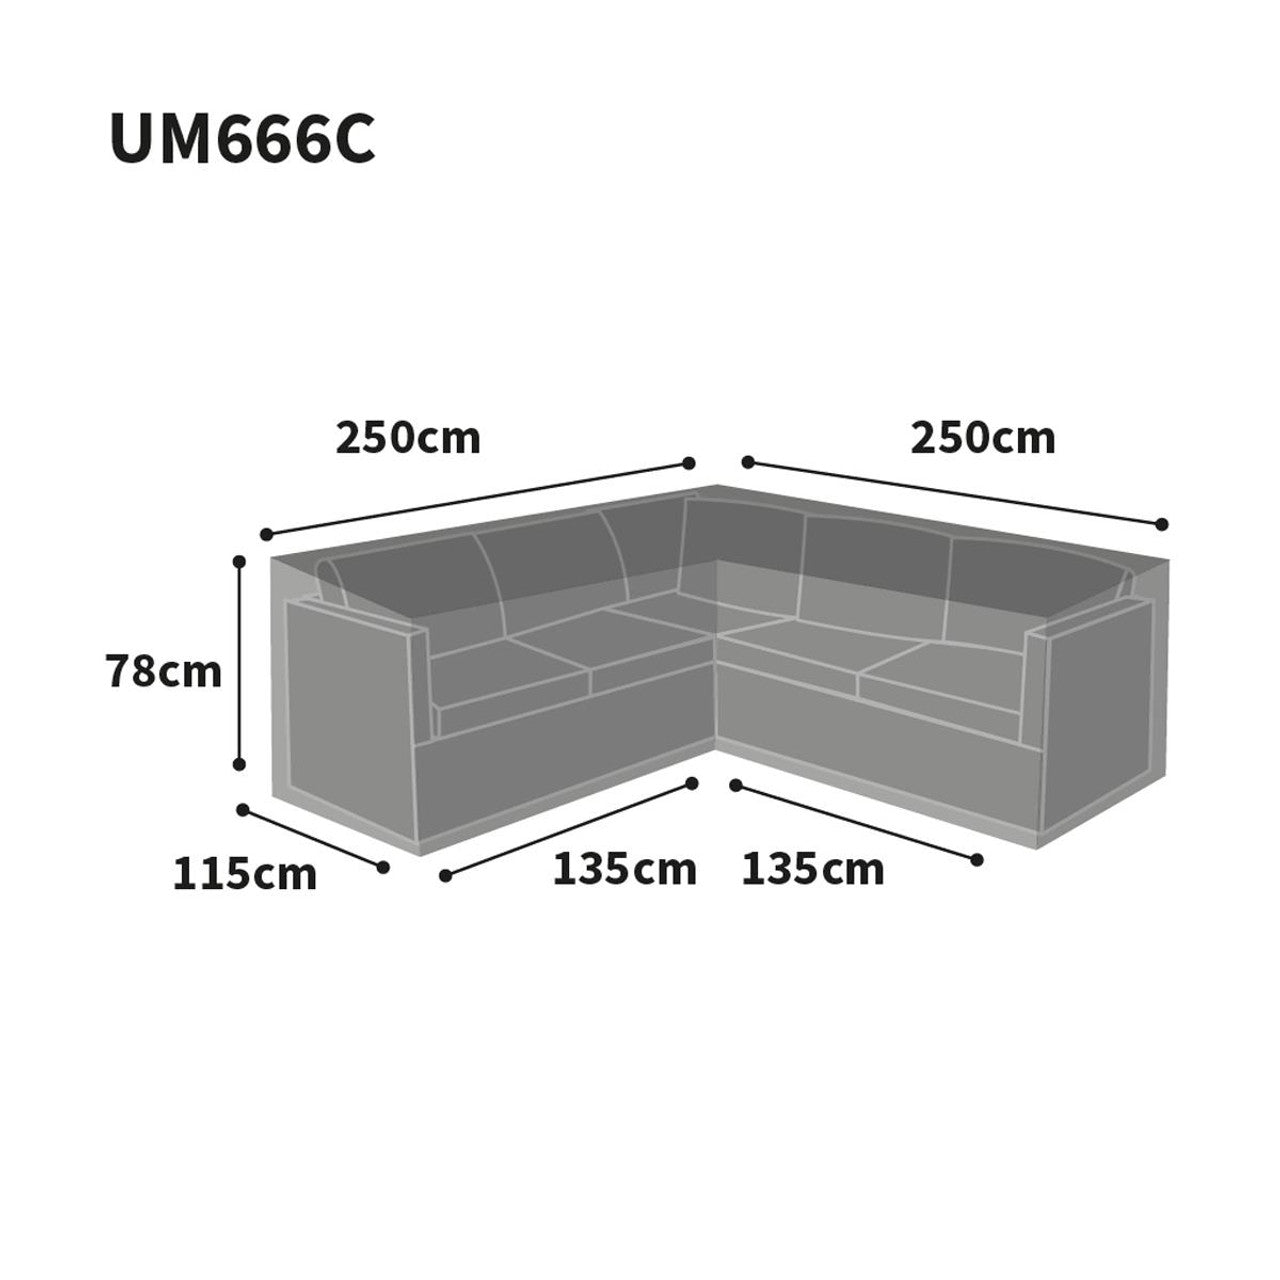 Bosmere Ultimate Protector Outdoor Furniture Cover For L Shaped Sofa 250cm x 250cm